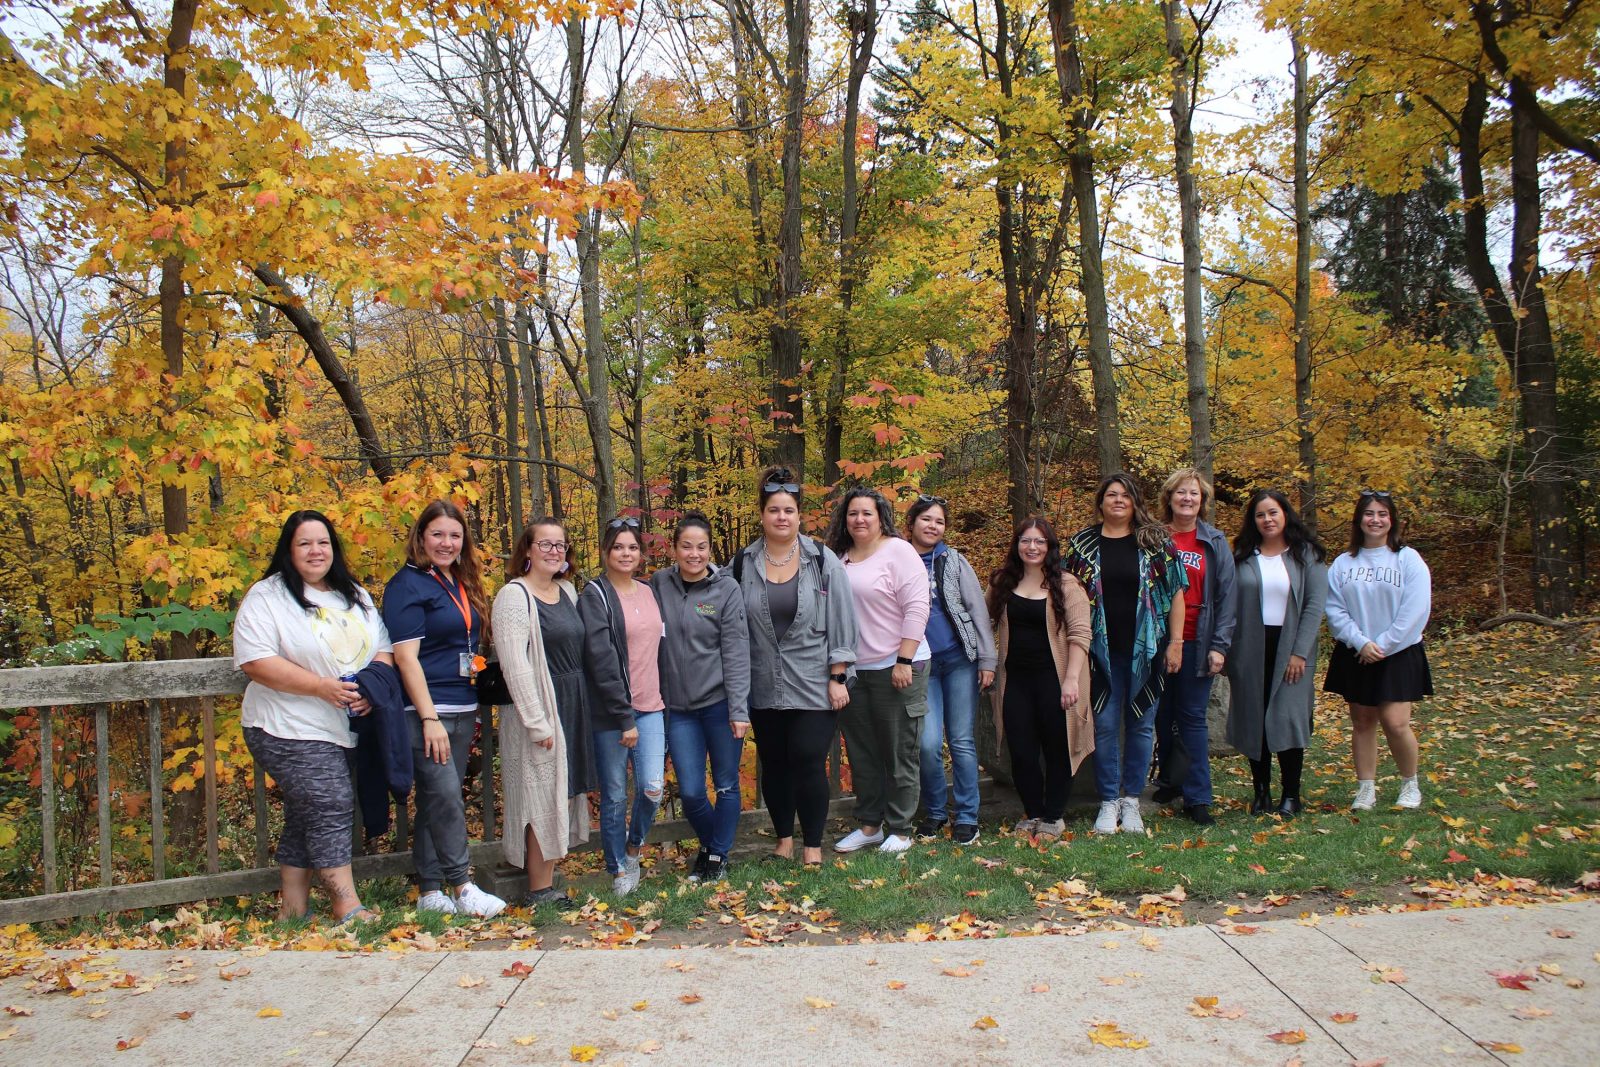 A group of women stand shoulder to shoulder outdoors at Brock University. They stand against trees with orange leaves along a path. They all smile warmly at the camera.